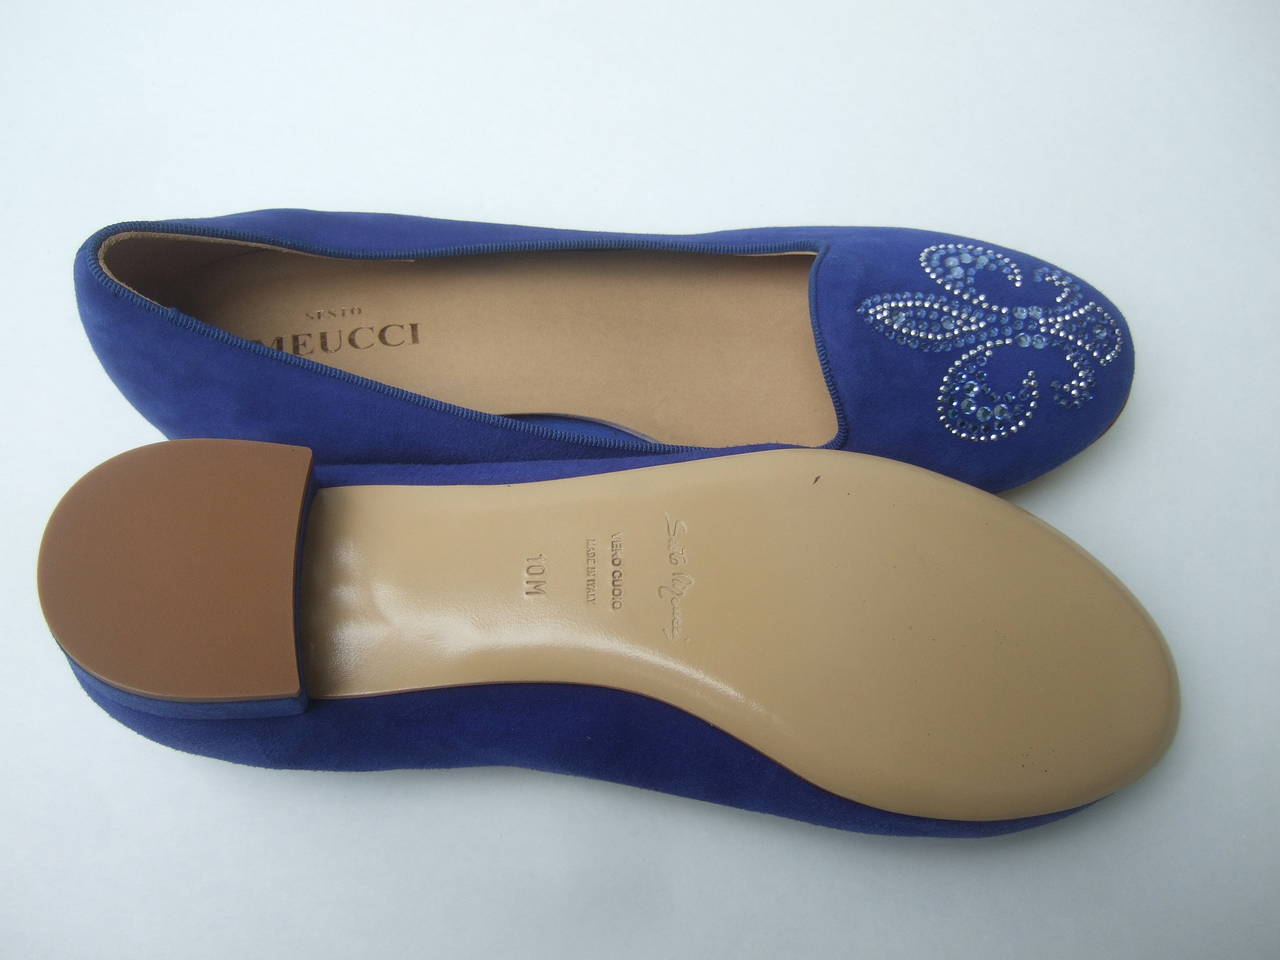 Crystal Jeweled Fleur di Lis Peacock Blue Suede Flats Made in Italy US Size 10 M For Sale 2